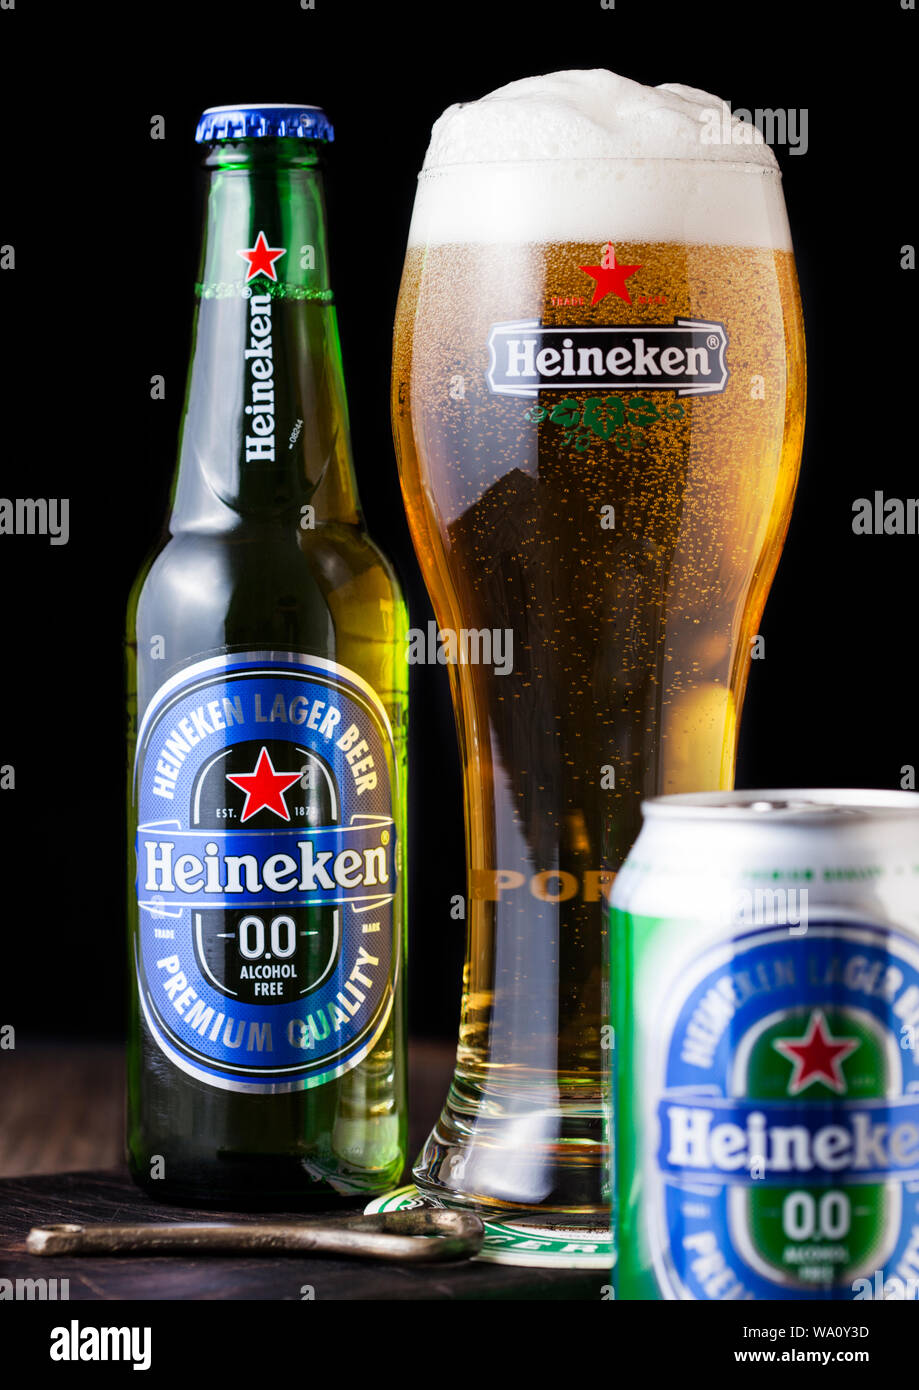 LONDON, UK - APRIL 27, 2018: Bottle and aluminium can of Heineken Alcohol free Lager Beer on dark wooden background. Heineken is the flagship product Stock Photo